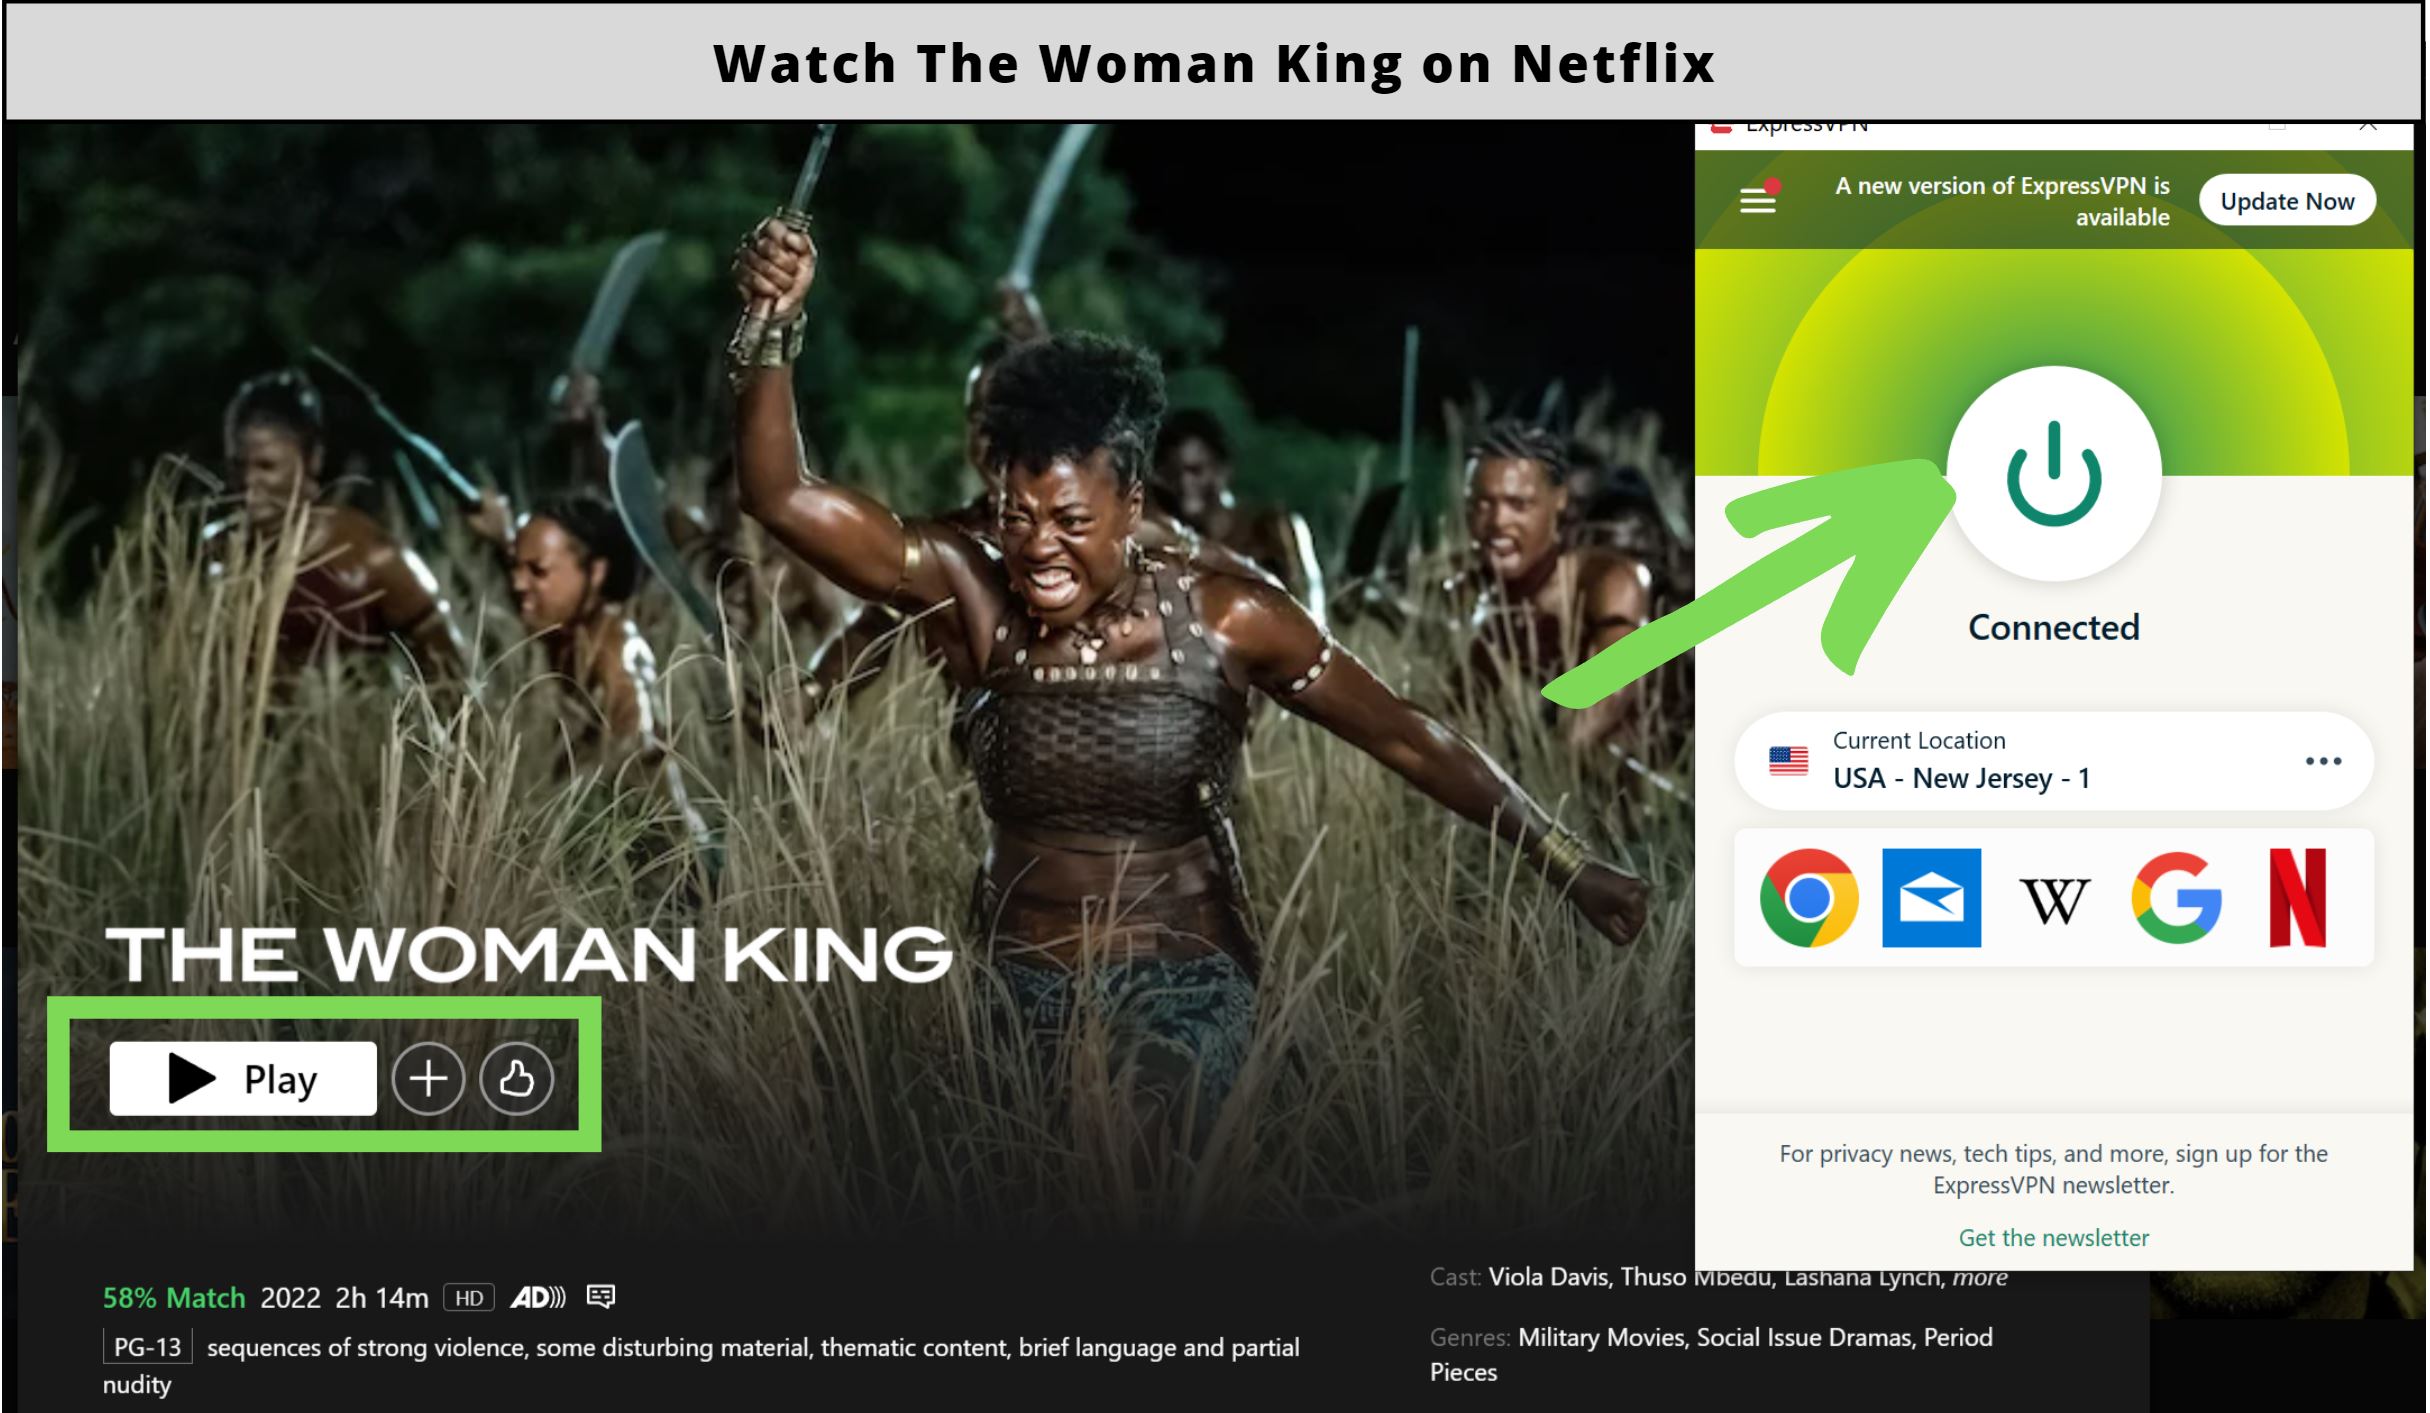 Is The Woman King on Netflix?